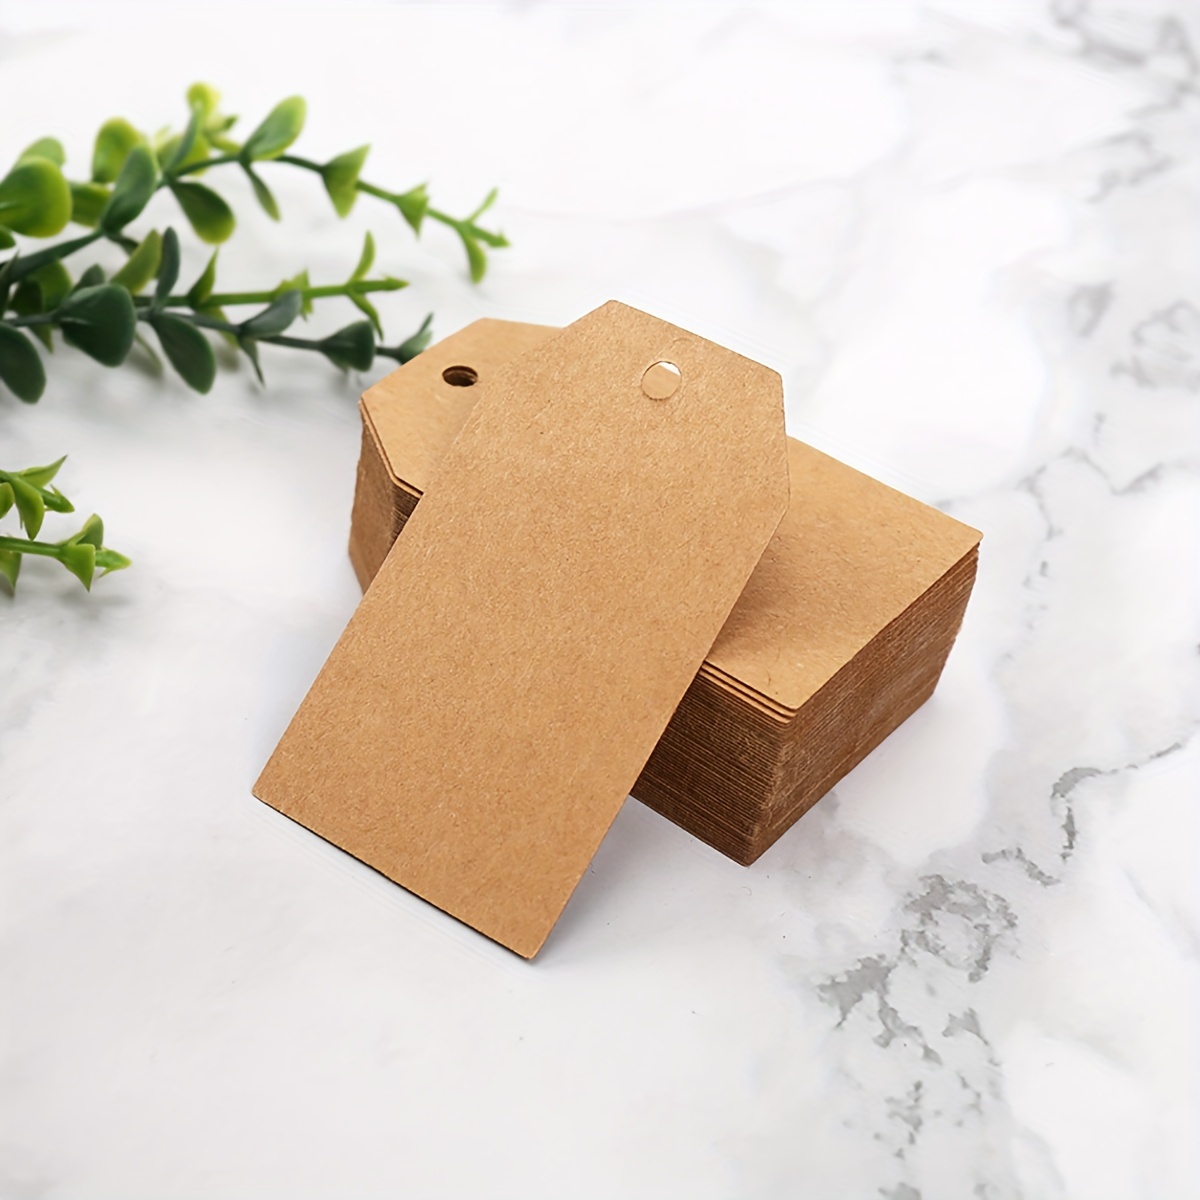 150PCS Kraft Paper Tags with Strings, Small Gift Tags Brown Tags